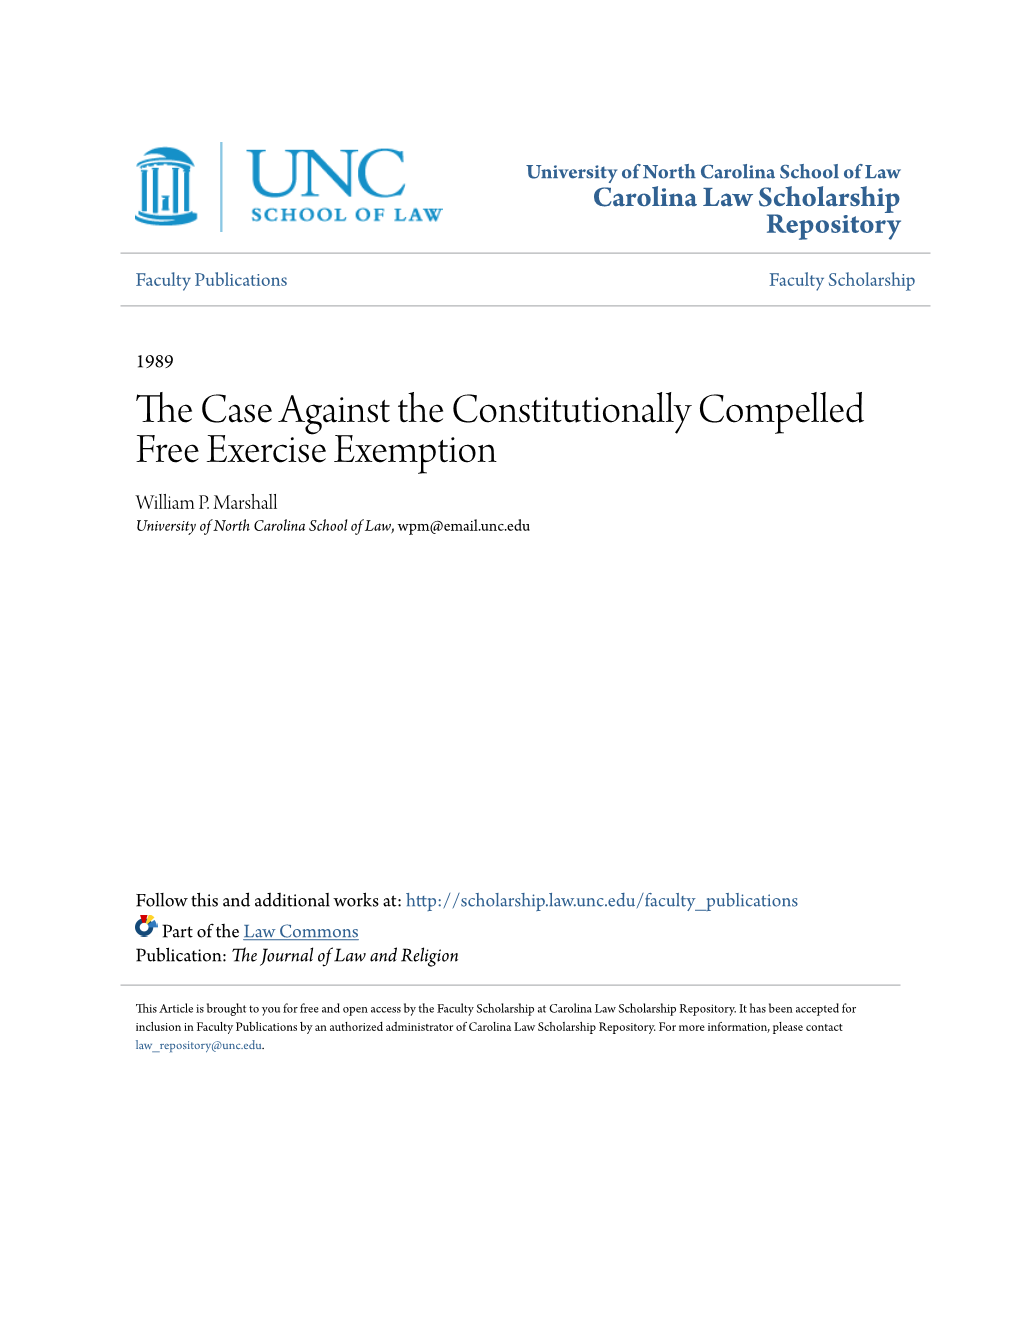 The Case Against the Constitutionally Compelled Free Exercise Exemption